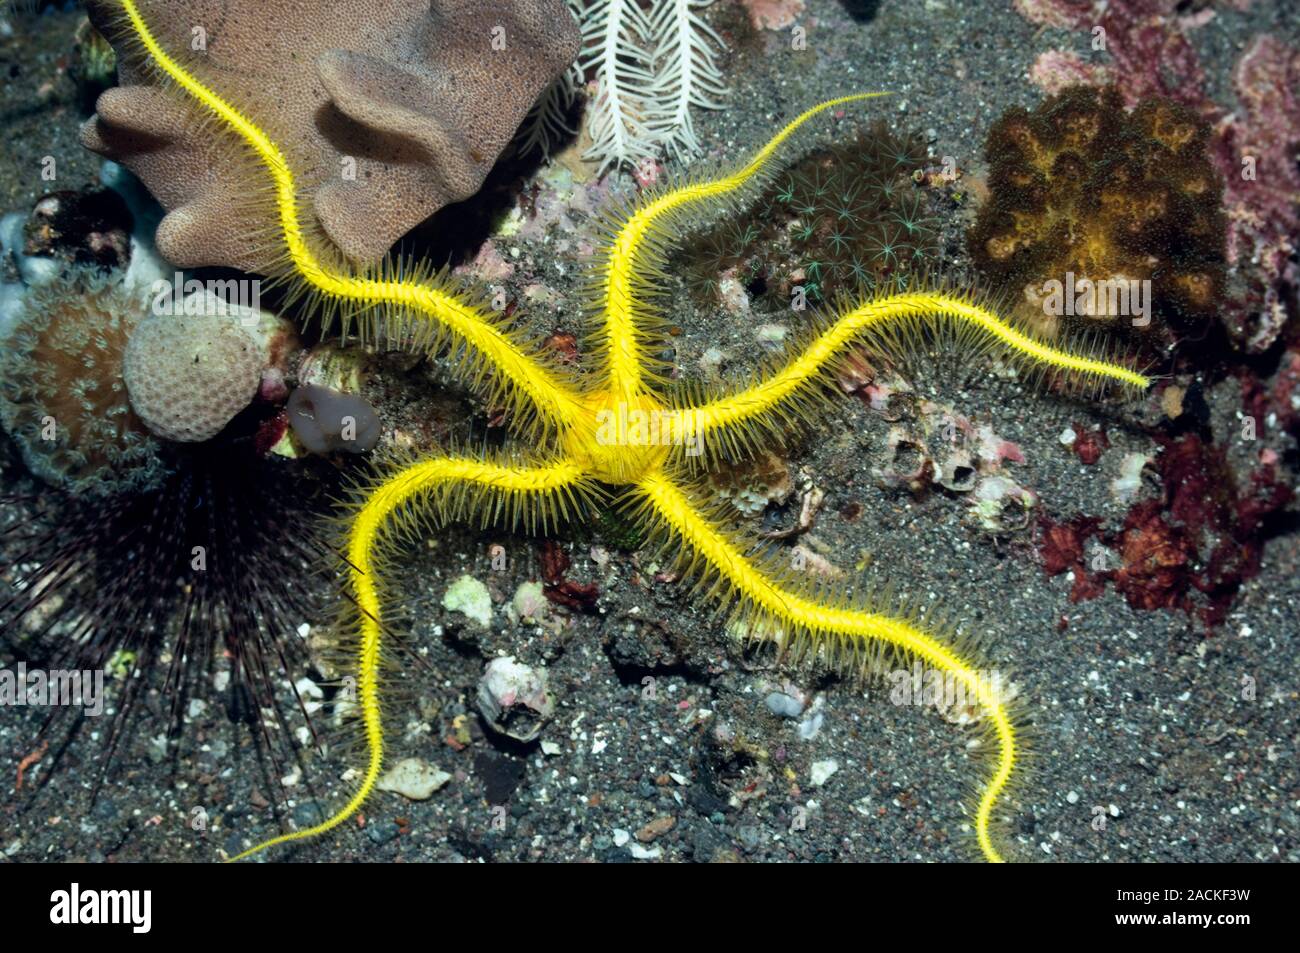 Brittlestar (Ophiothrix sp., yellow) on a reef. Photographed off Rinca island, Komodo National Park, Indonesia. Stock Photo